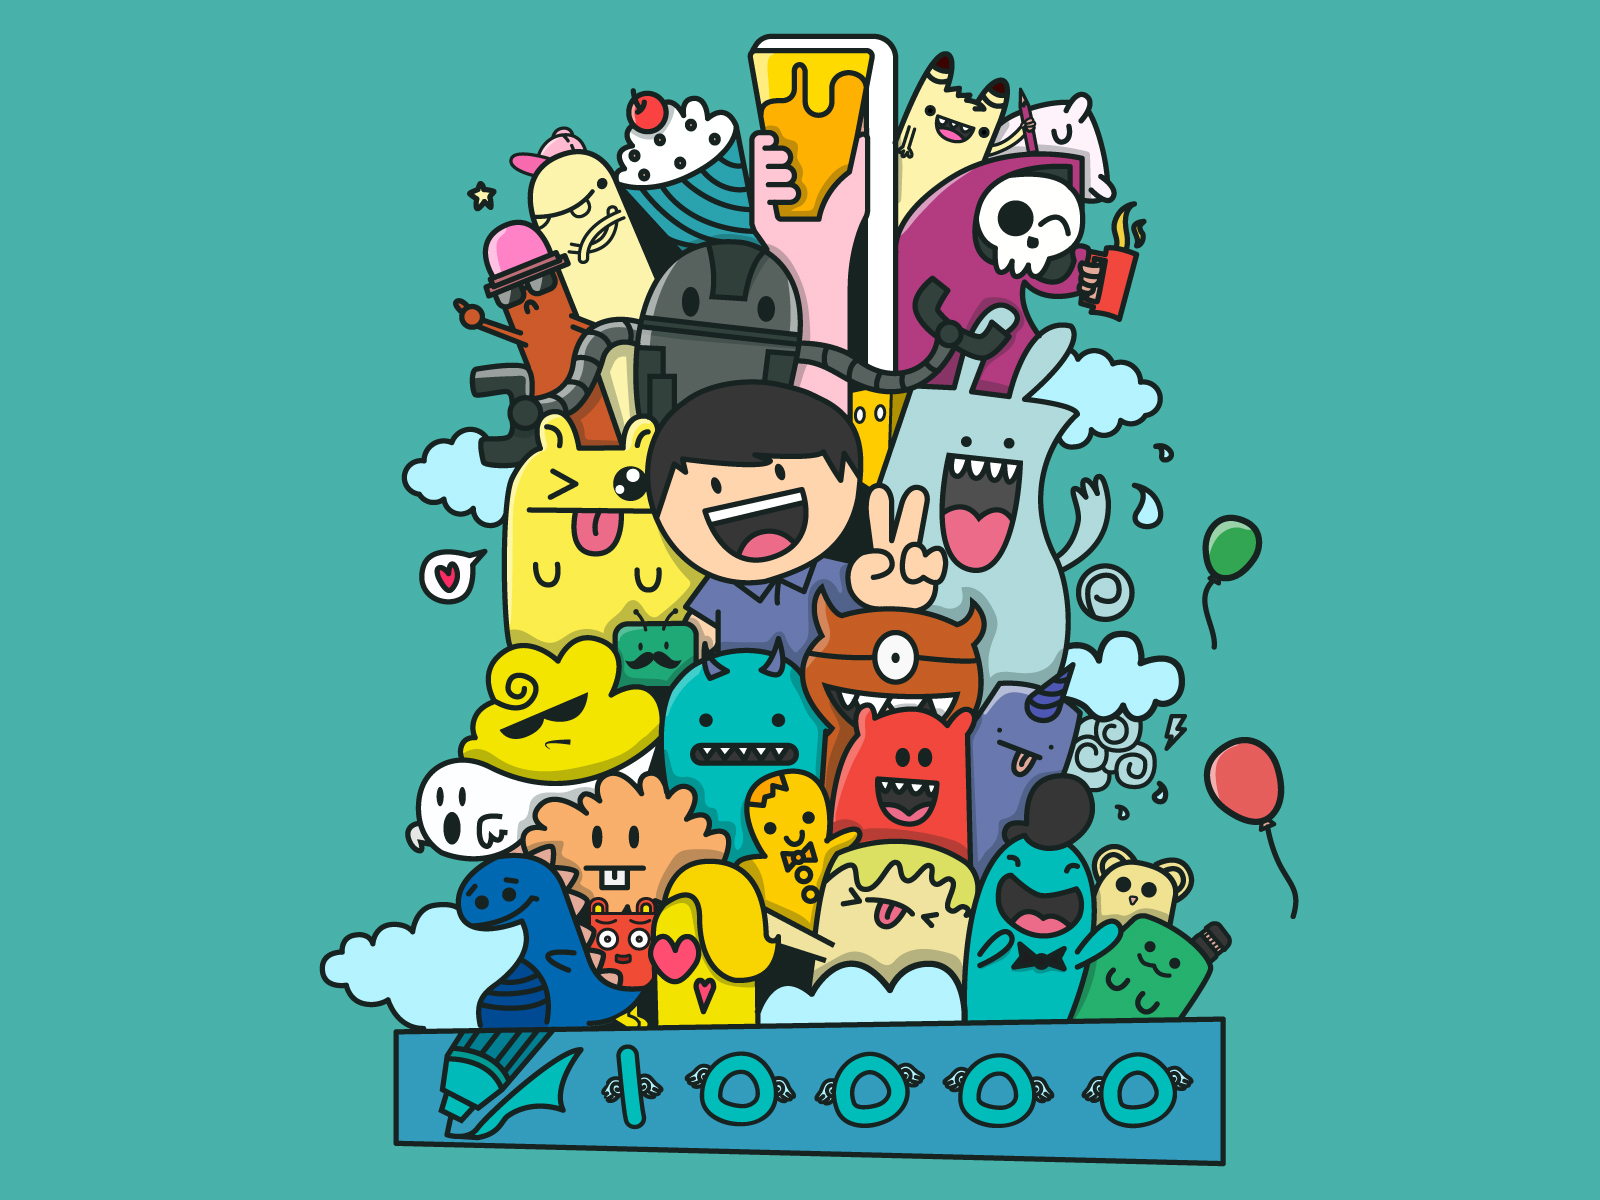 10000 followers of DWTD color cute illustration